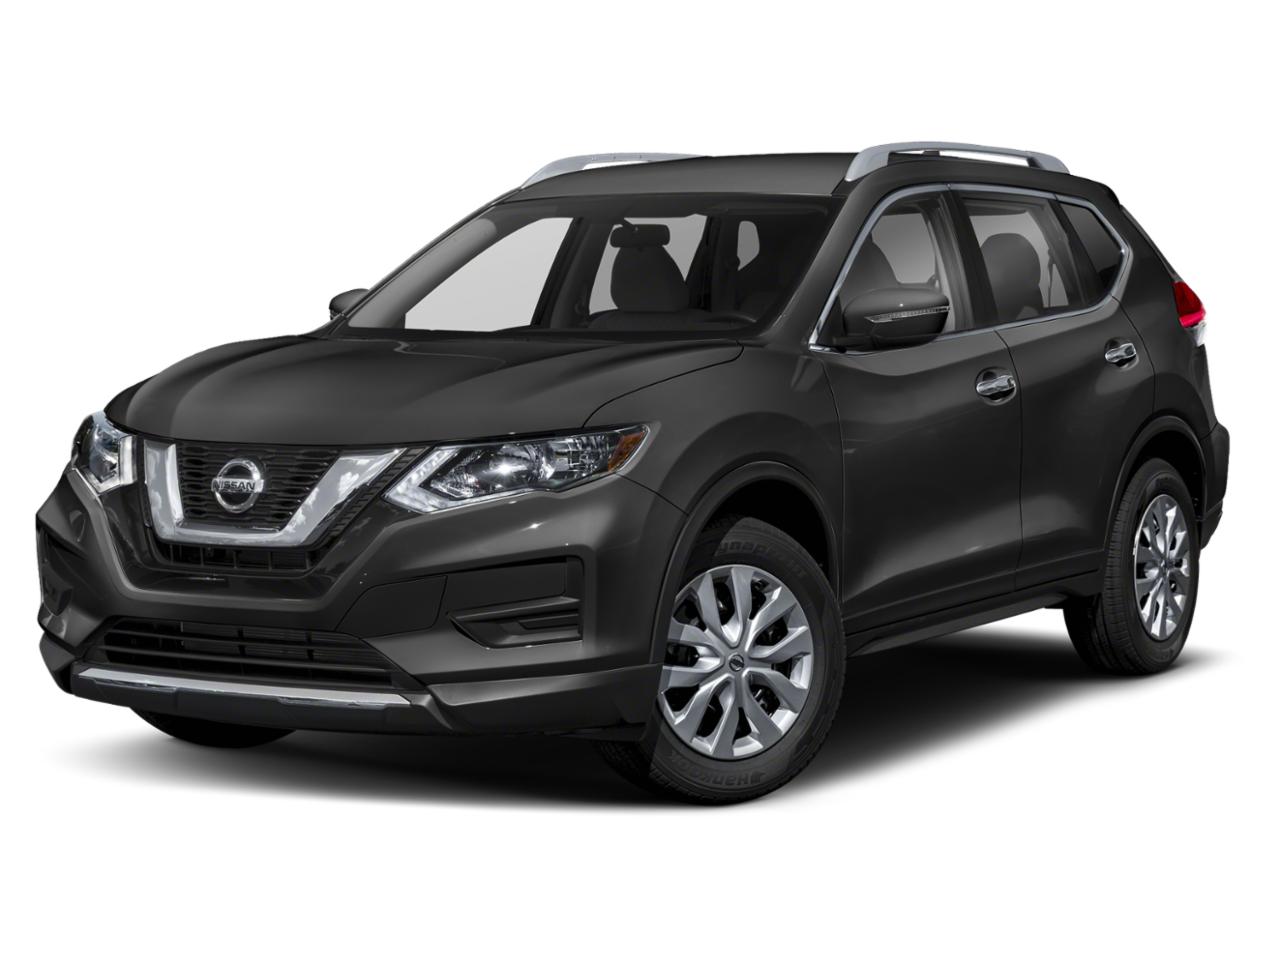 2017 Nissan Rogue Vehicle Photo in Denison, TX 75020